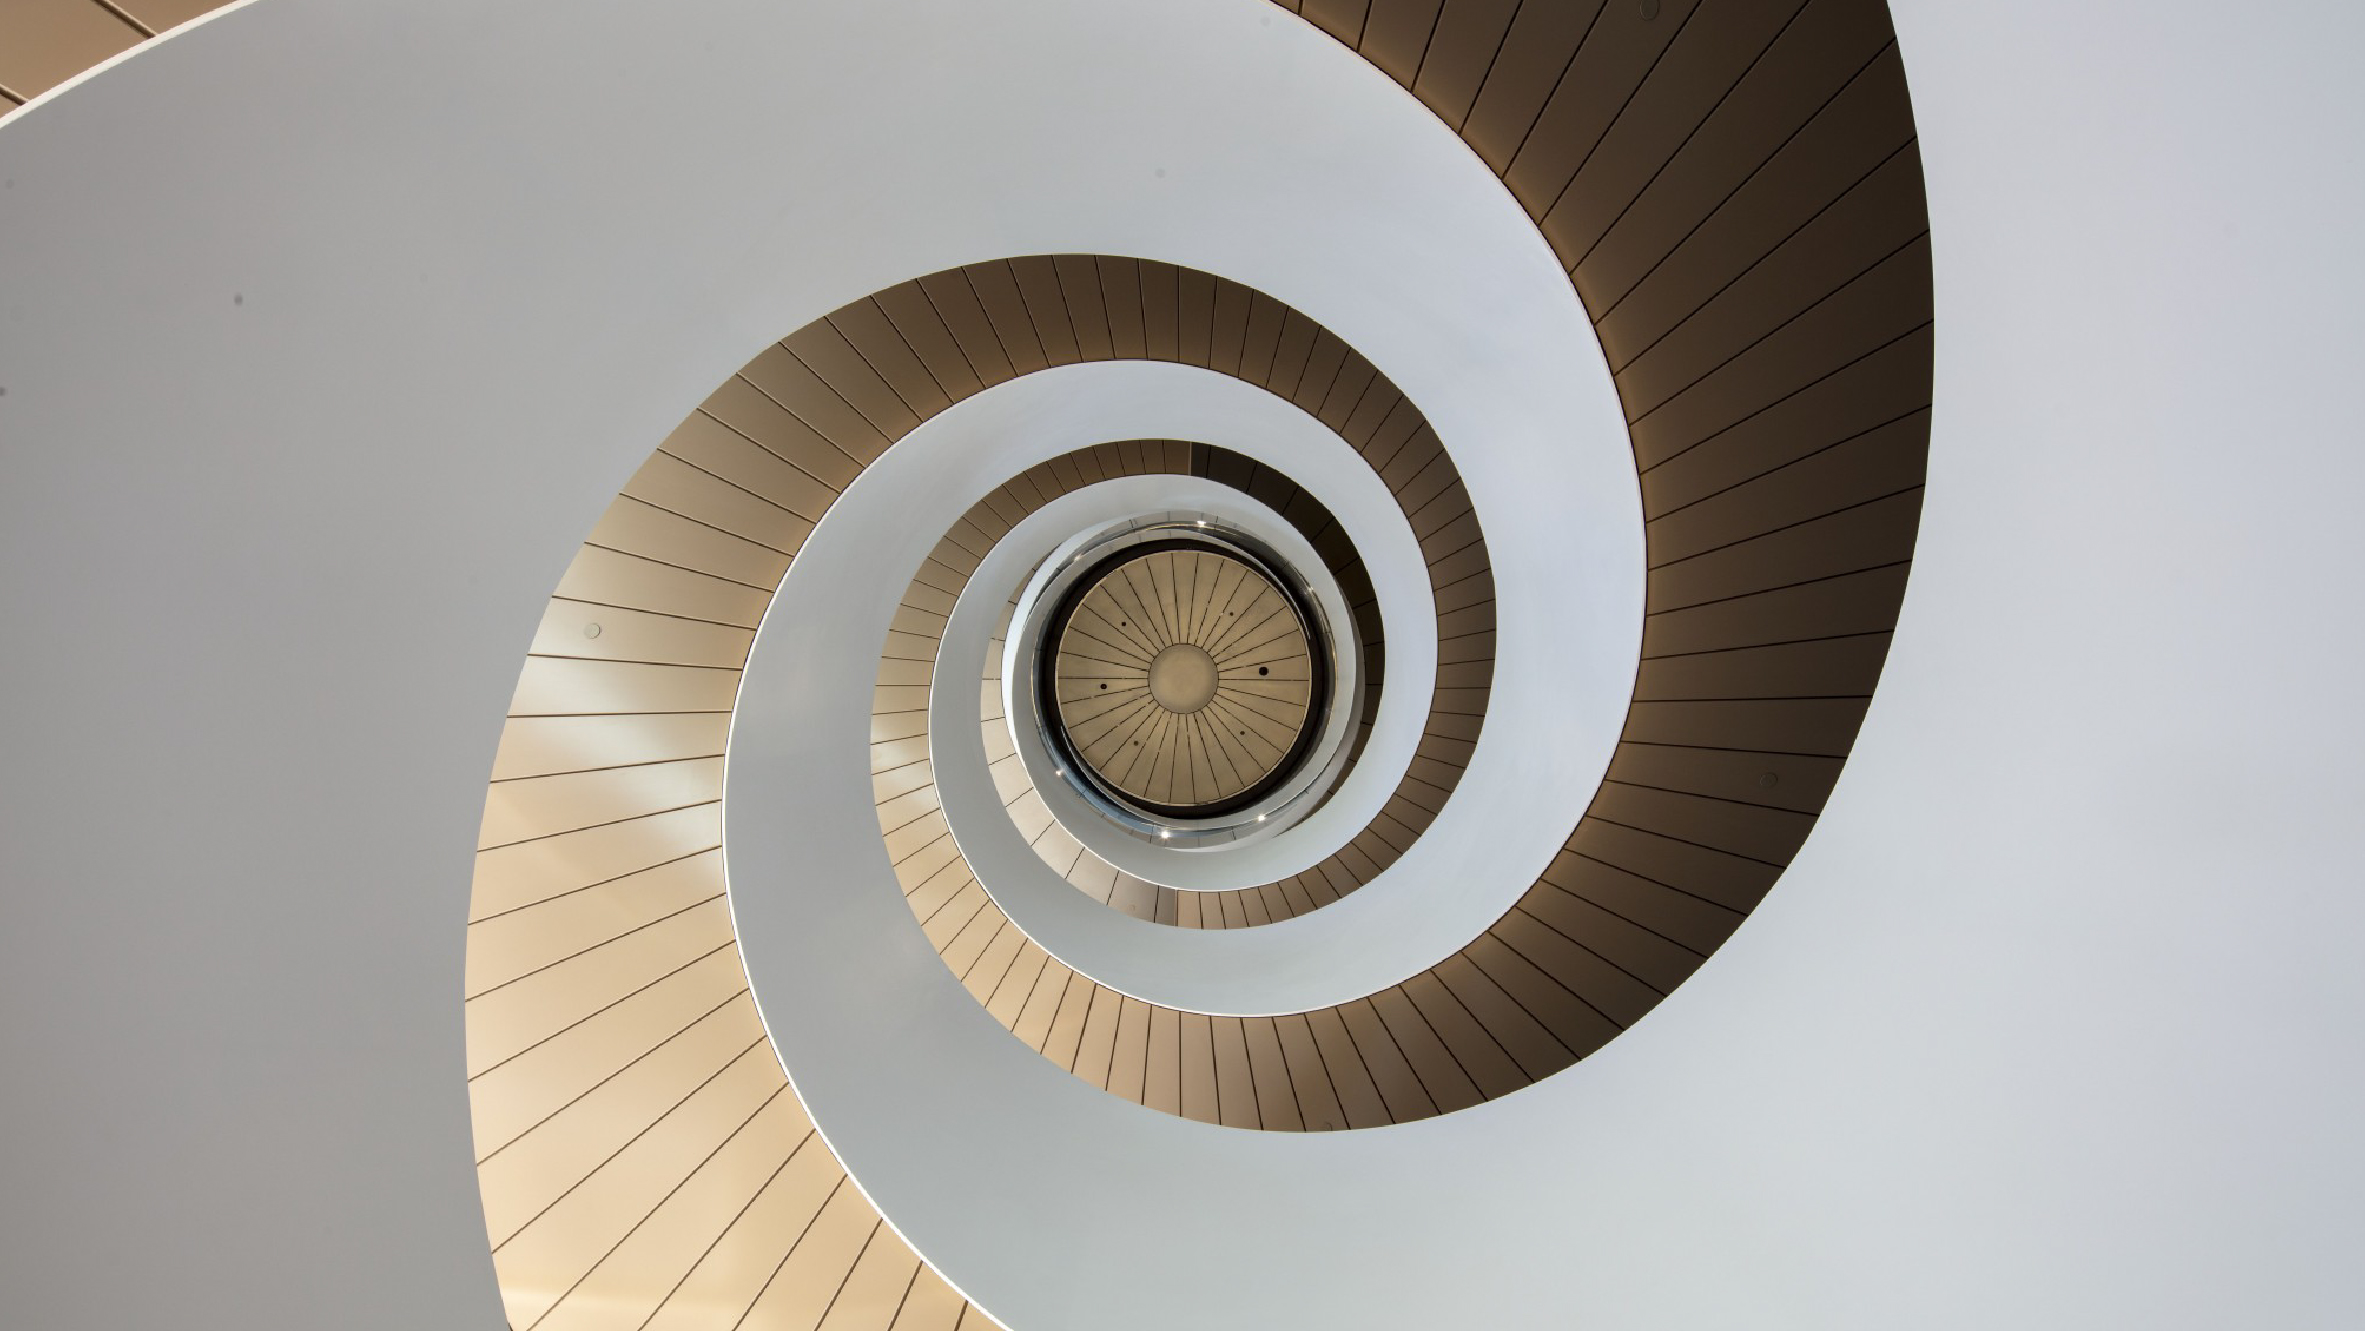 UTS Central - Helix Stair by Fjmtstudio.